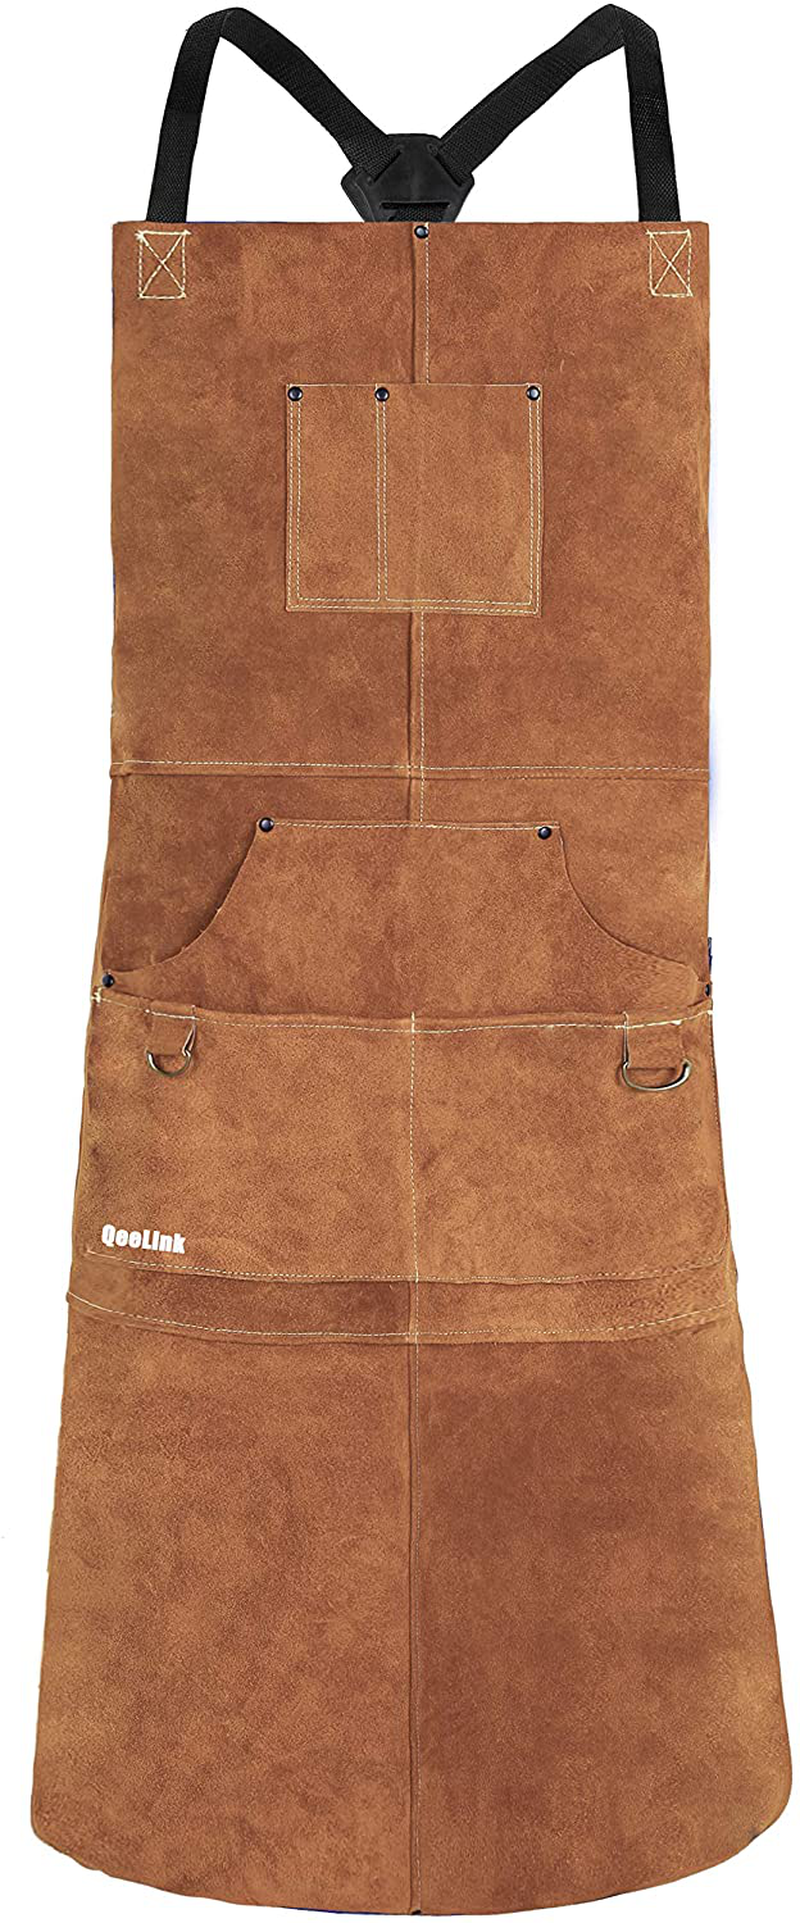 QeeLink Leather Welding Apron - Heat & Flame-Resistant Heavy Duty Work Forge Apron with 6 Pockets, 42" Large & Cross Back Extra Long Strap, Adjustable M to XXXL for Men & Women (Brown)